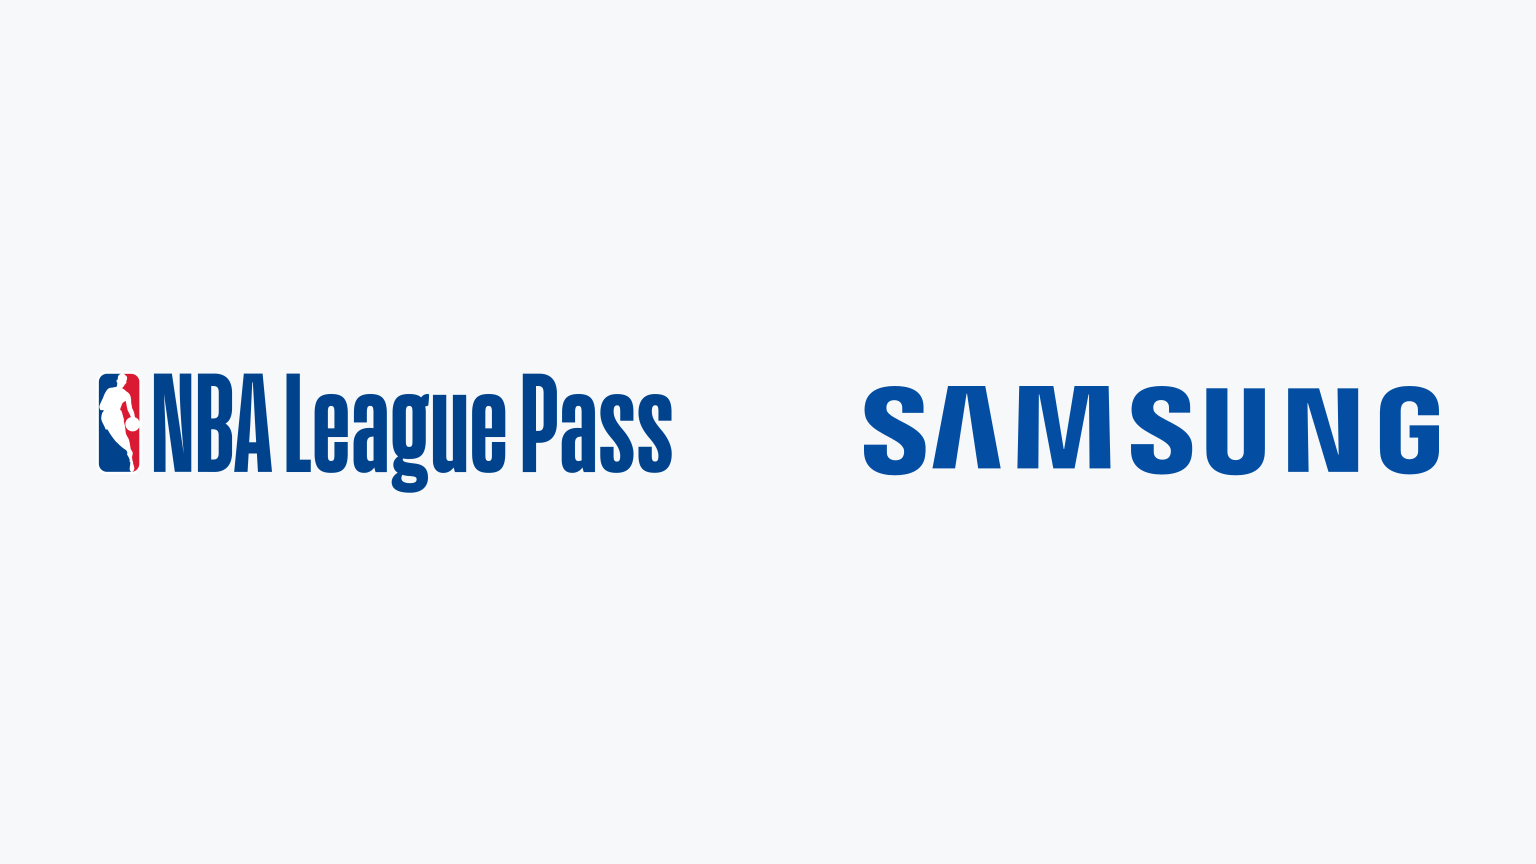 How to download nba league pass on samsung smart tv roses will bloom again mp3 download